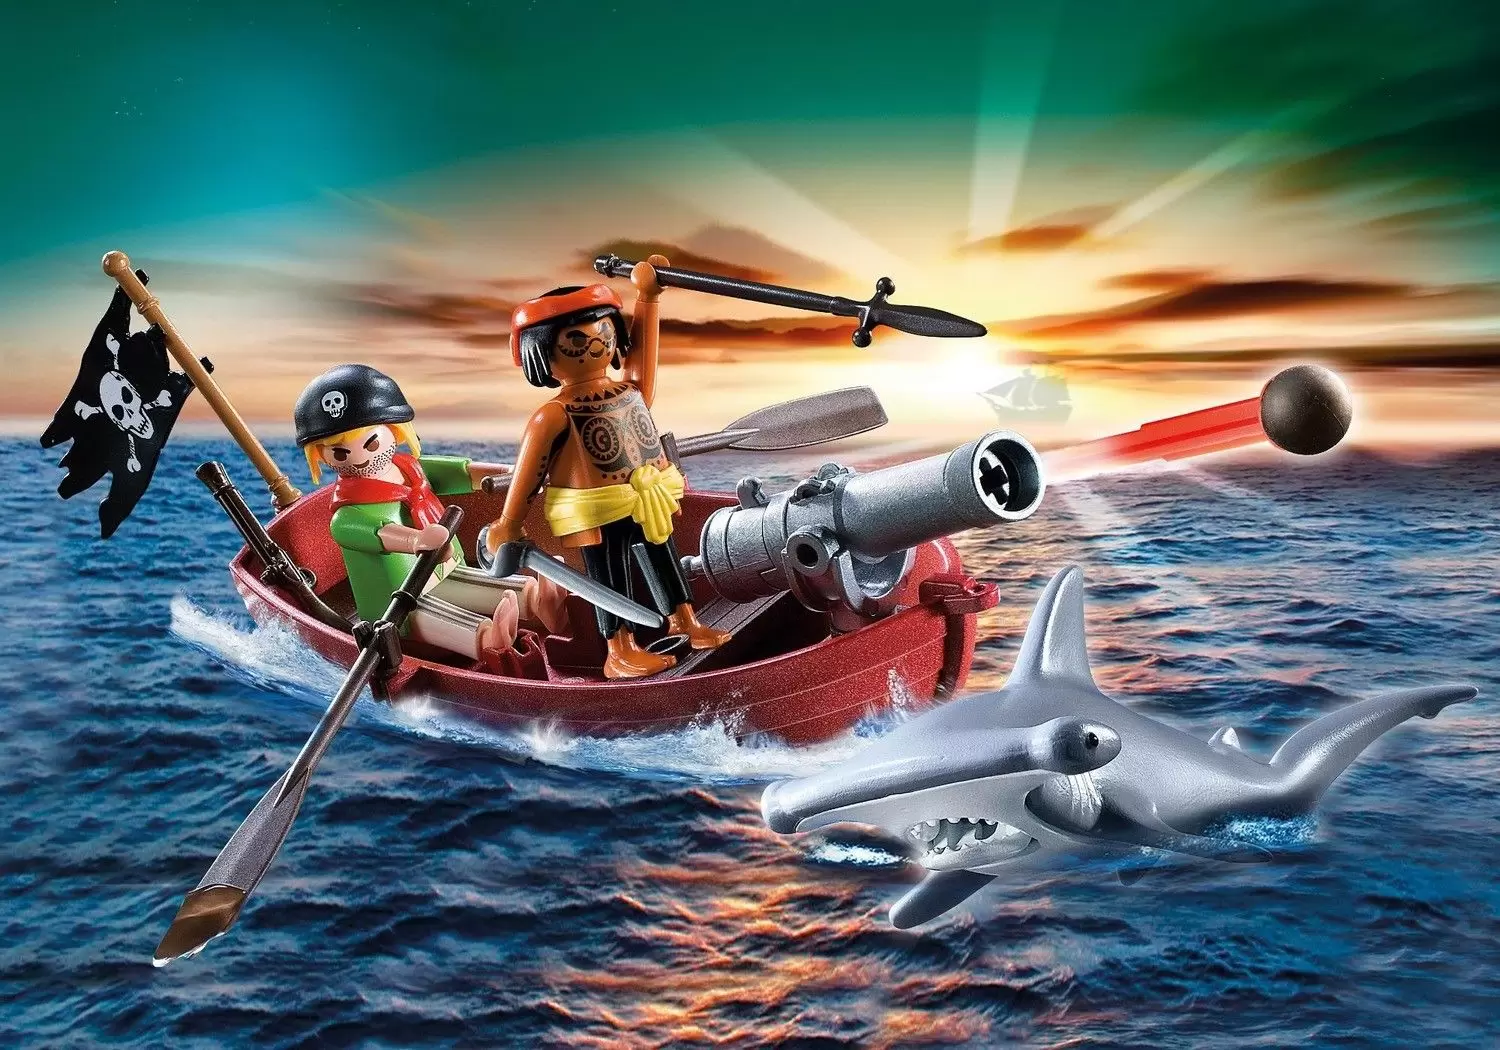 Pirate Playmobil - Pirates\' rowboat with hammer shark